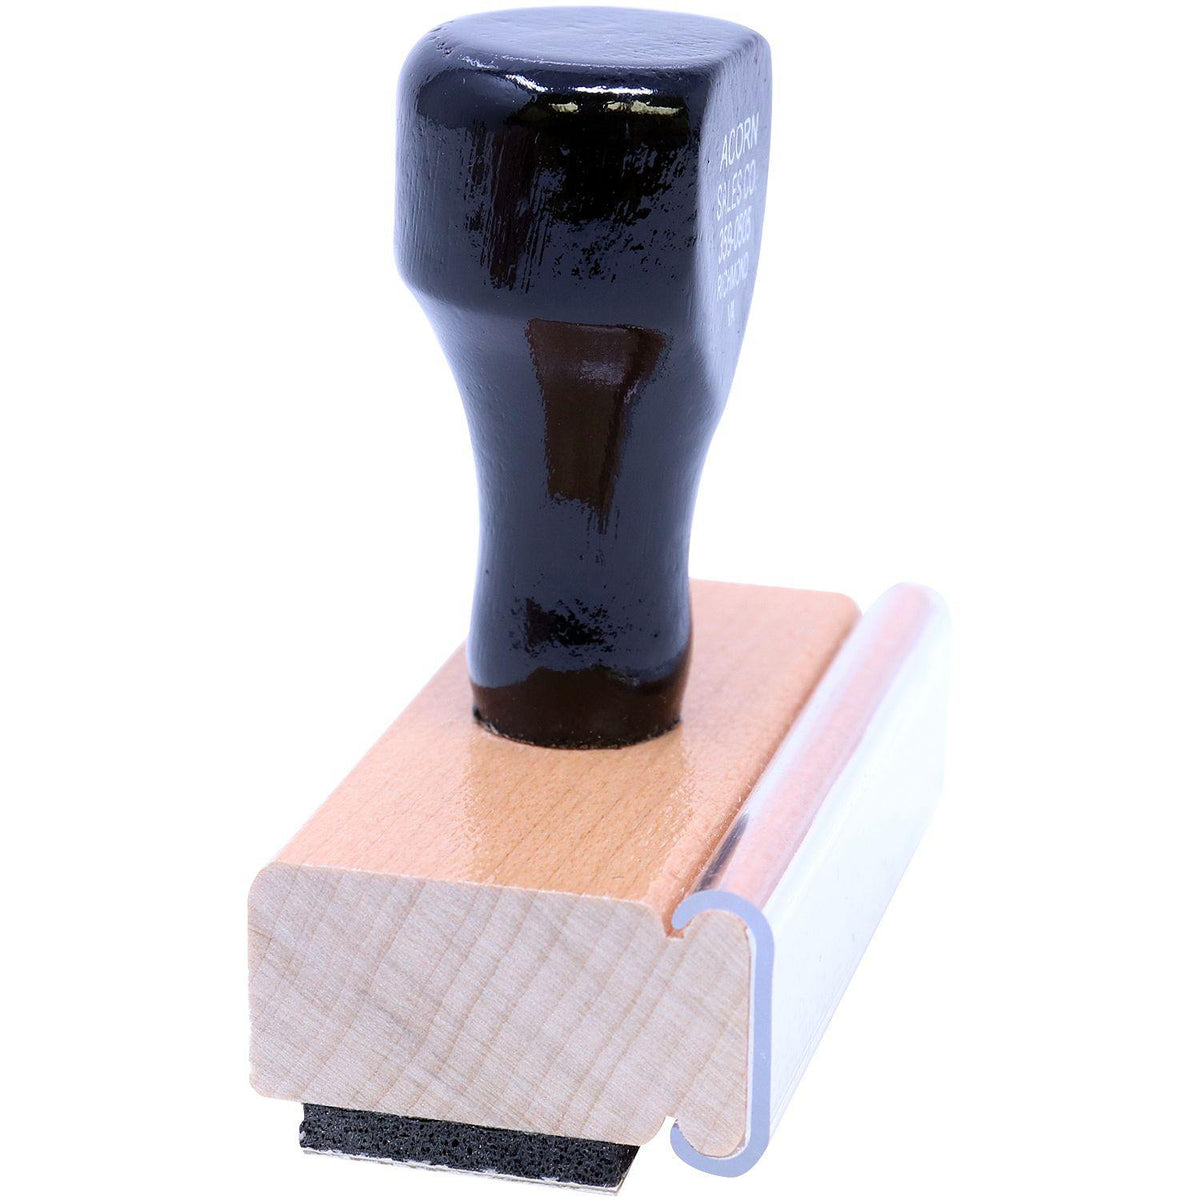 Side View of Copia Rubber Stamp at an Angle